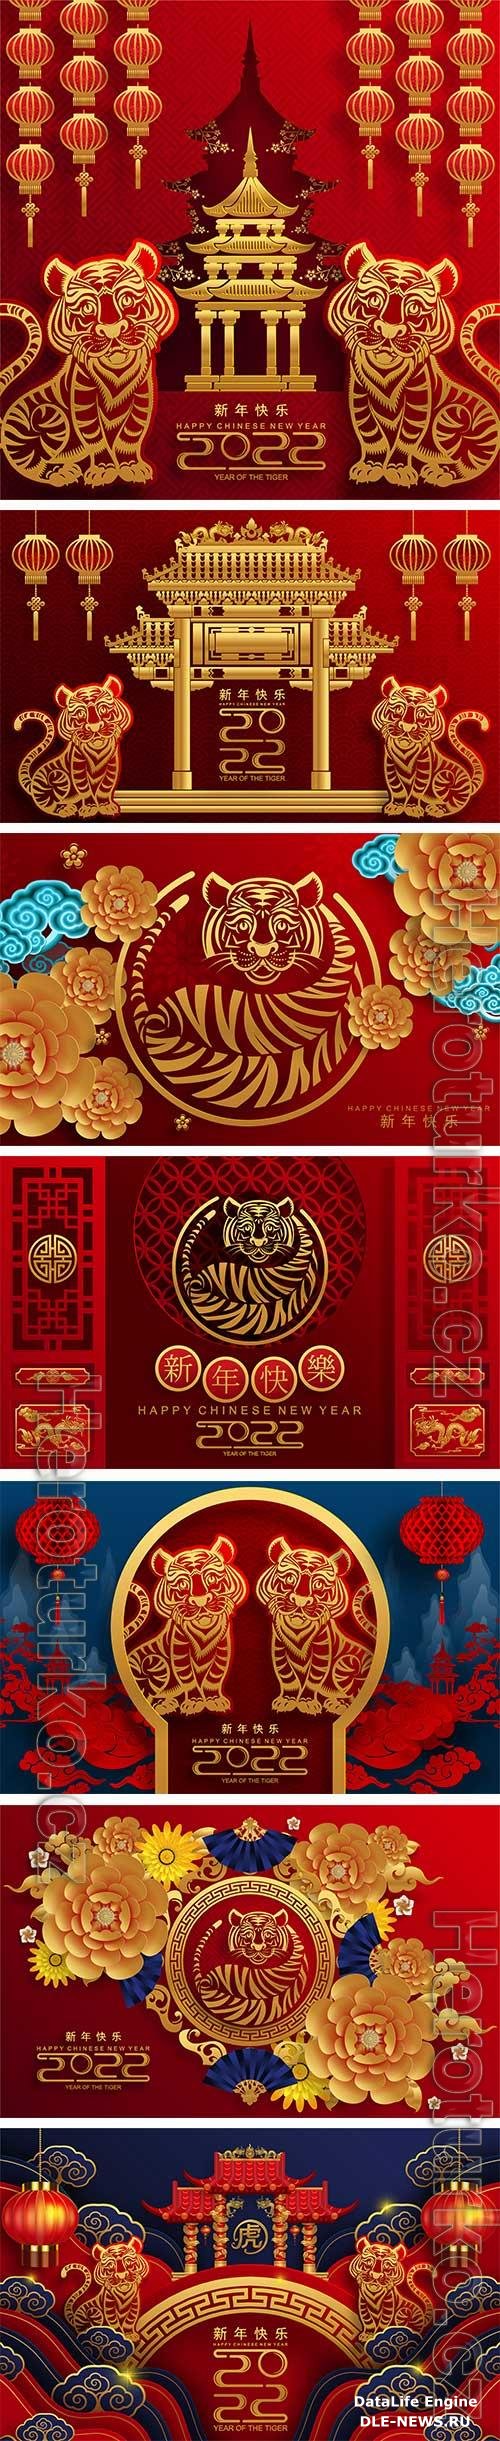 Chinese New Year vector illustration with tigers and flowers